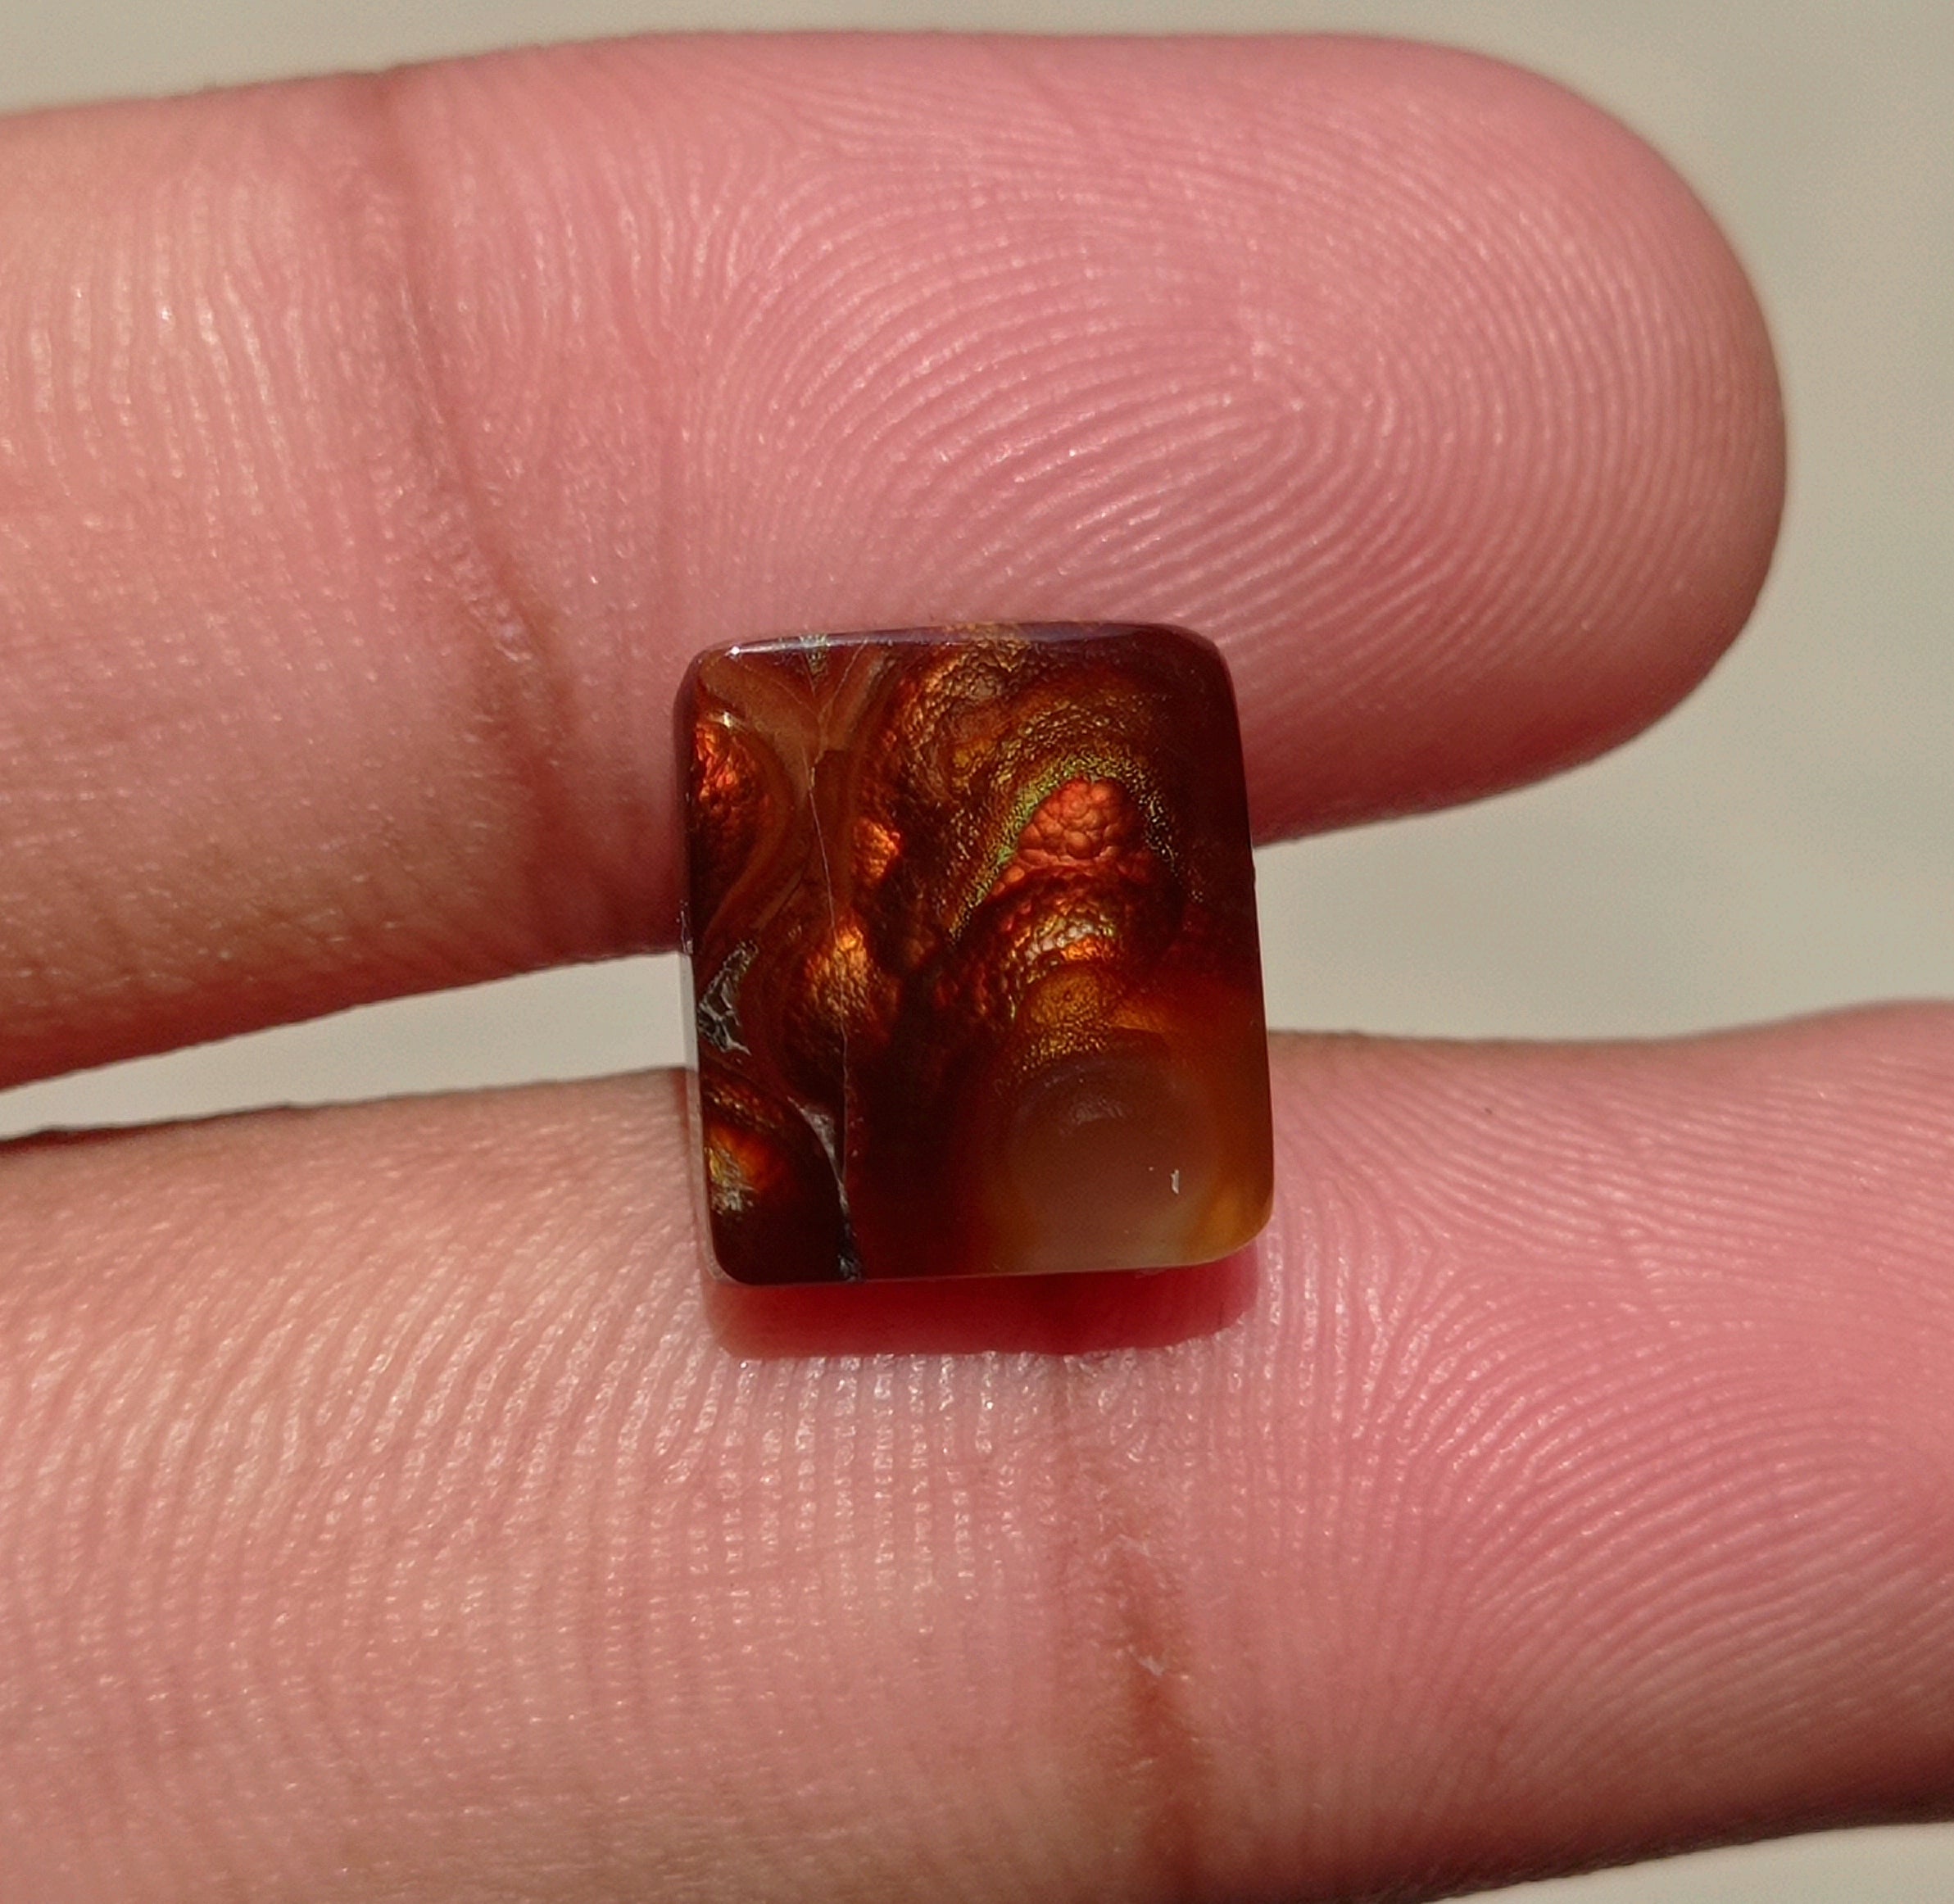 7.2ct Mexican Fire Agate,  Rare Fire Agate, Colorfully Squared Fire Agate, Perfect gemstone Gift For All, Dimensions 12x11x4mm